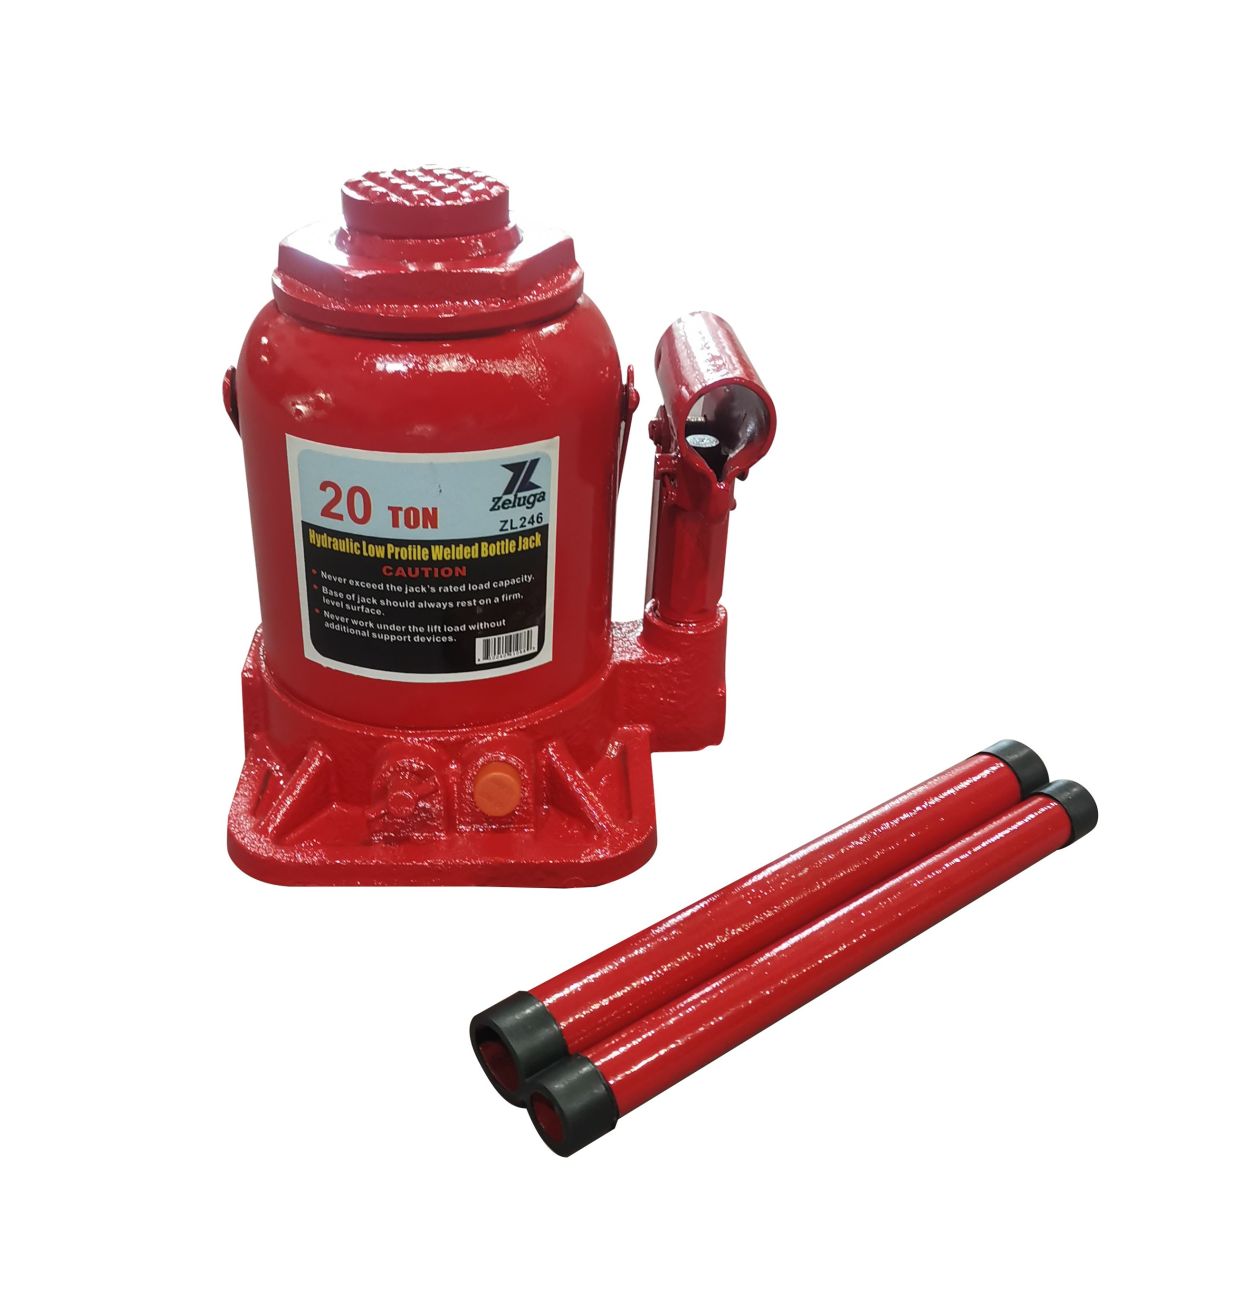 11-246 20 Ton Capacity Hydraulic Low Profile Welded Bottle Jack, Red